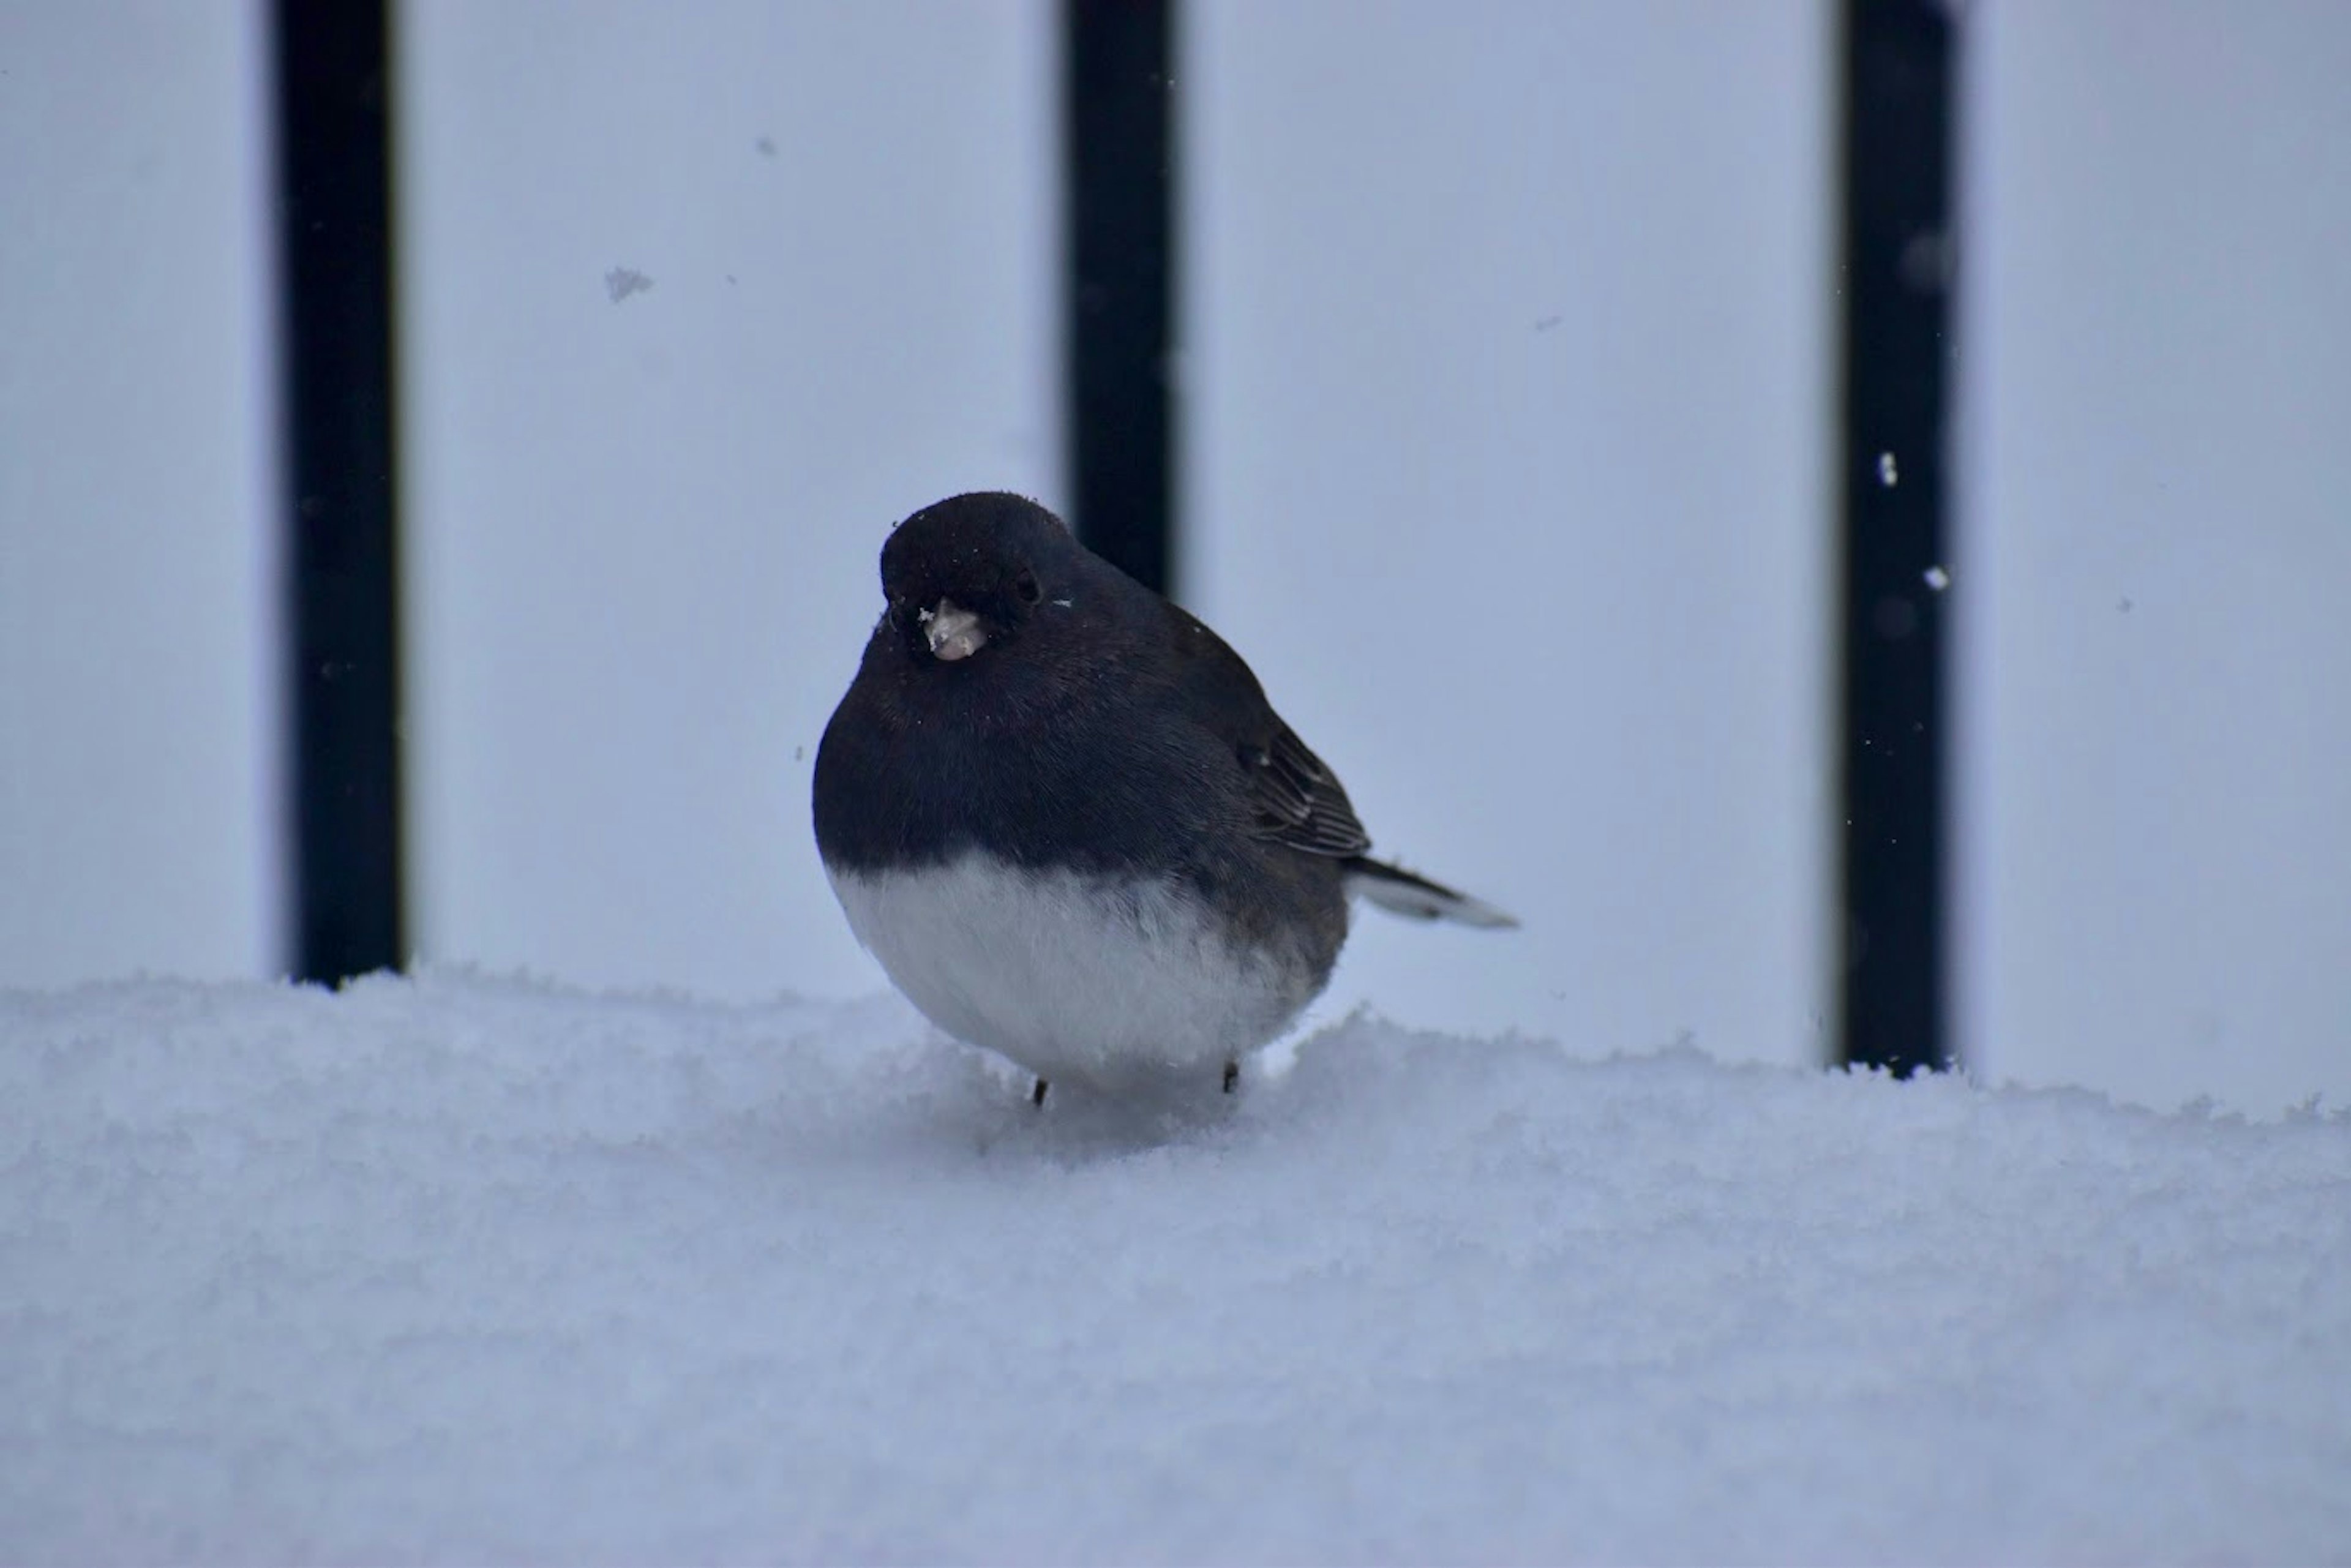 If a Junco wore jeans, it would wear JNCOs.